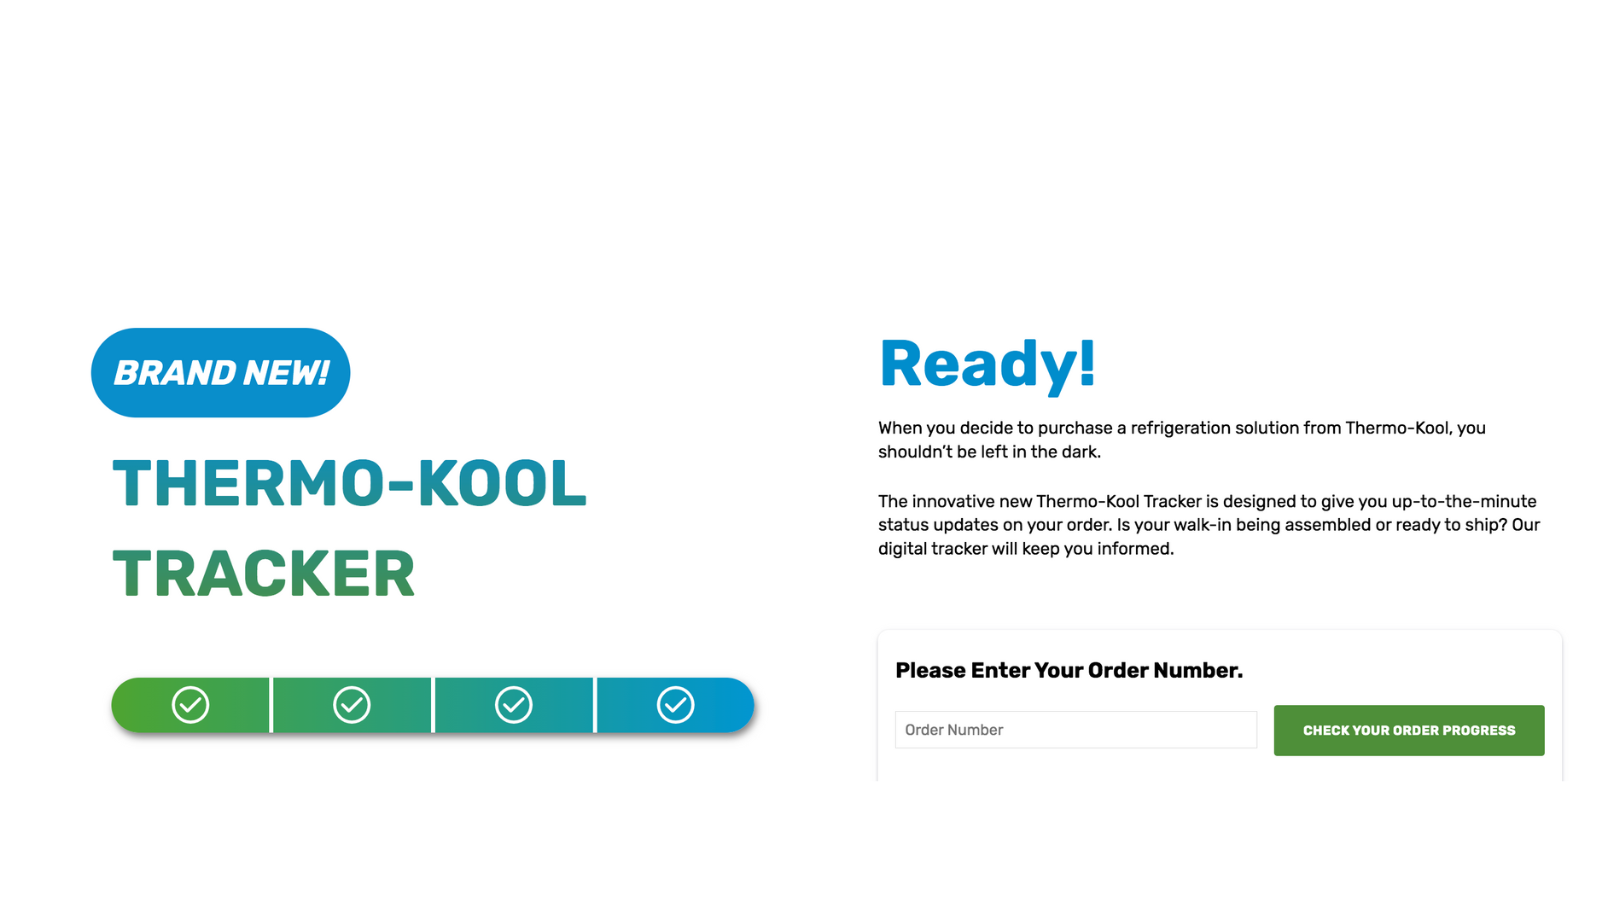 Copy of Thermo-Kool website homepage with text. Text reads Brand New! Thermo-Kool Tracker.